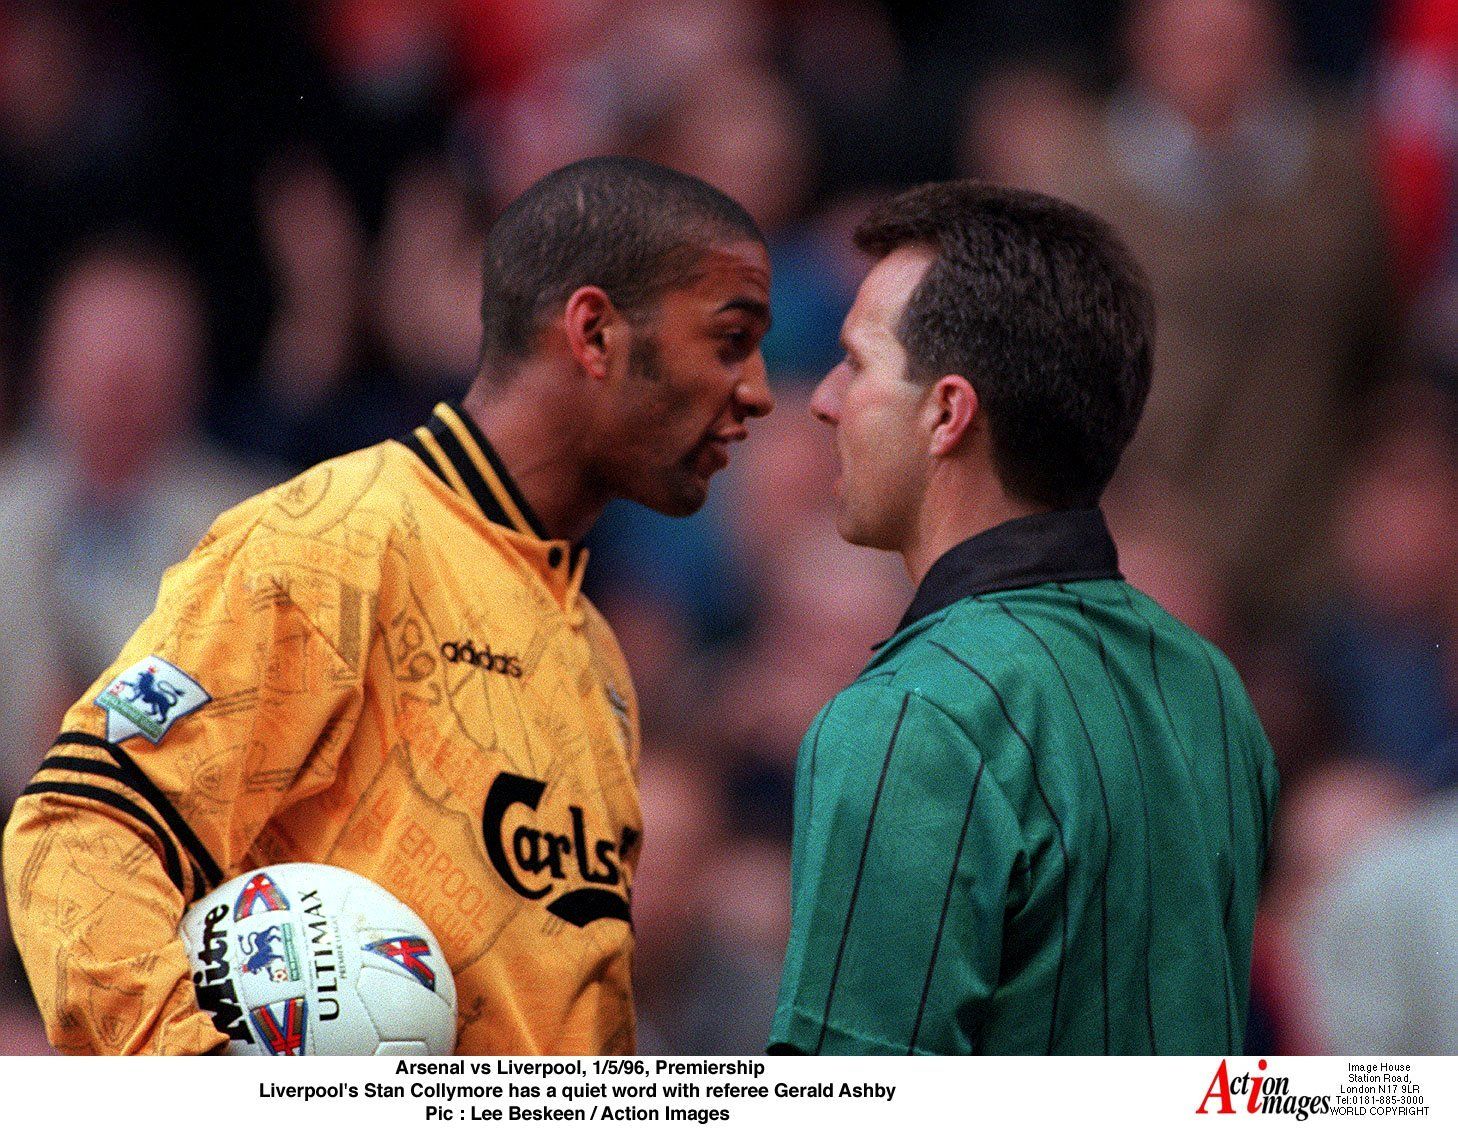 Arsenal vs Liverpool, 1/5/96, Premiership 
Liverpool's Phil Babb has a quiet word with the linesman 
Pic : Lee Beskeen / Action Images